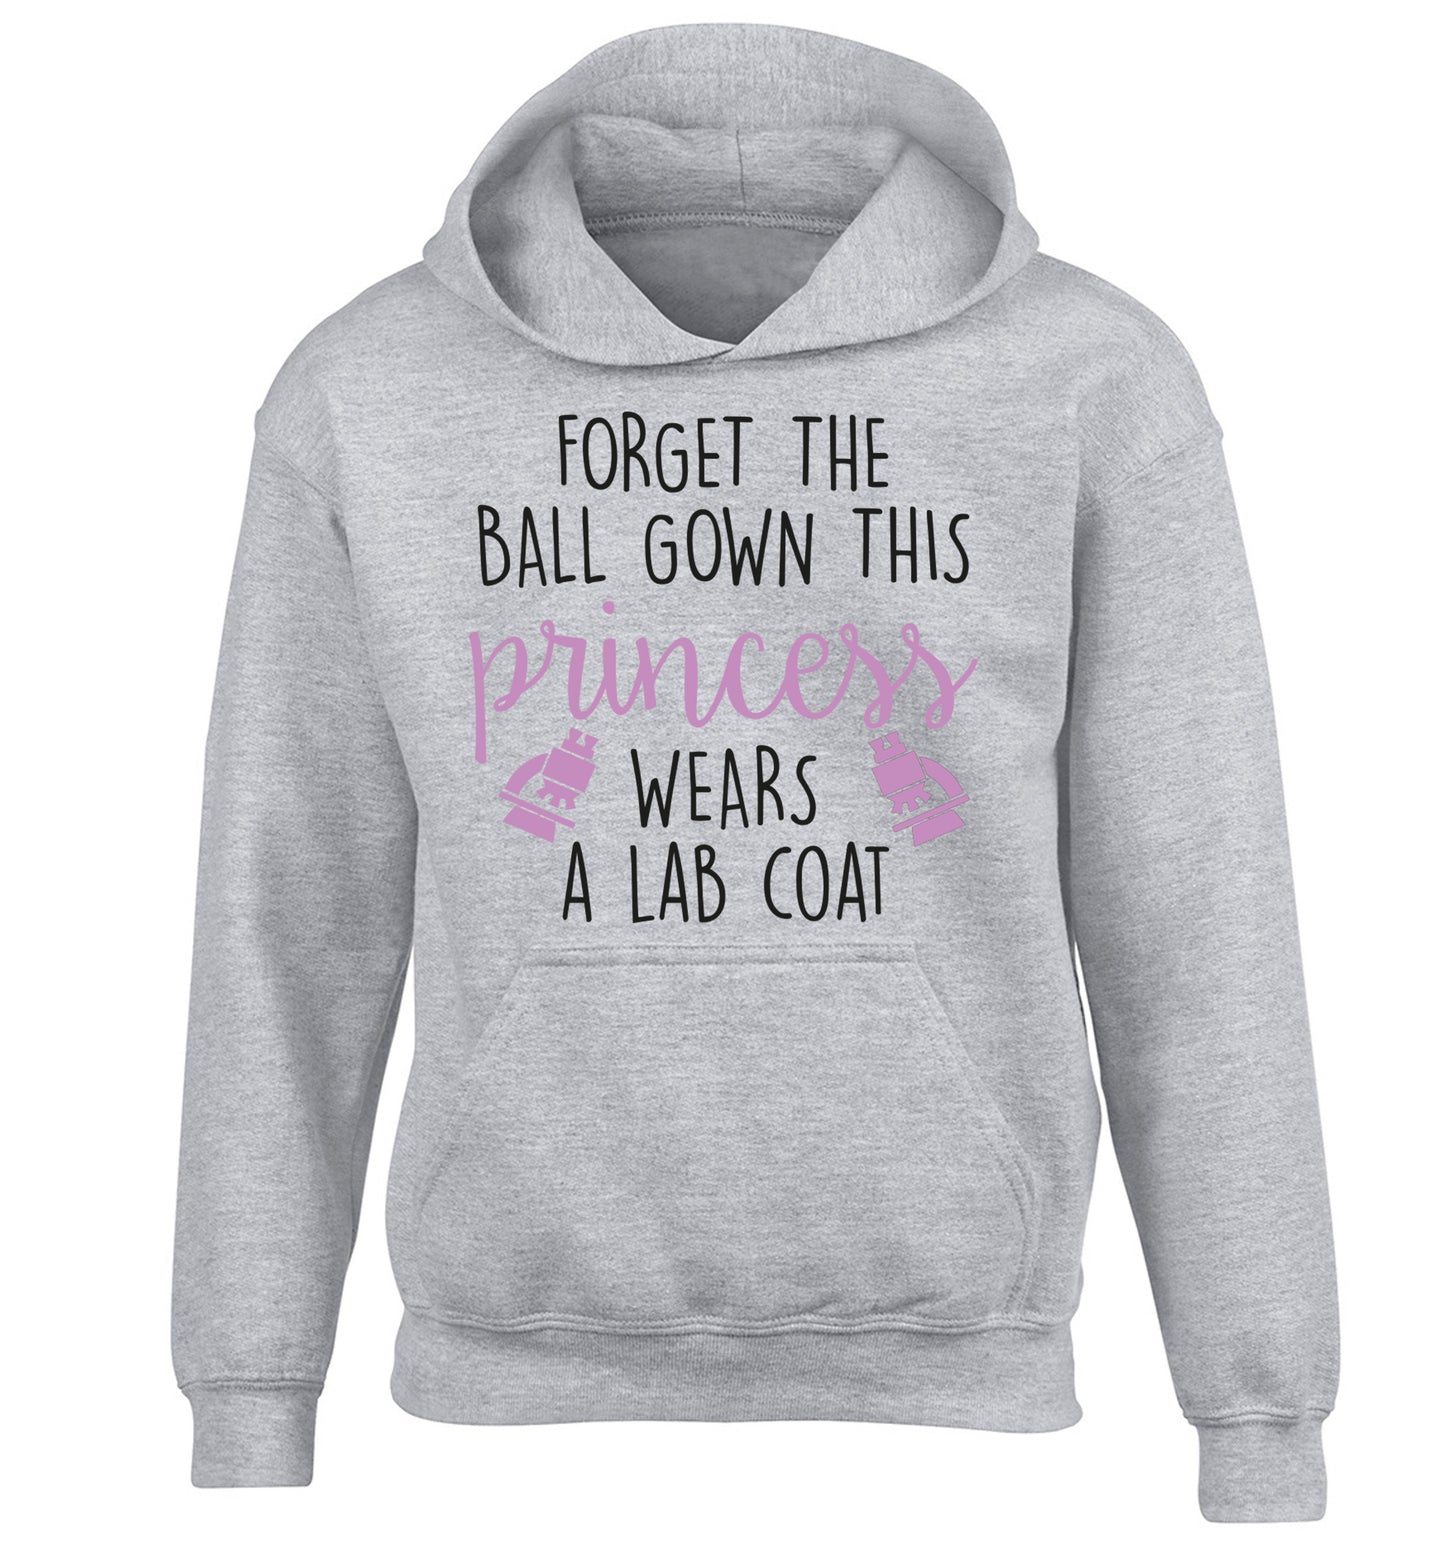 Forget the ball gown this princess wears a lab coat children's grey hoodie 12-14 Years